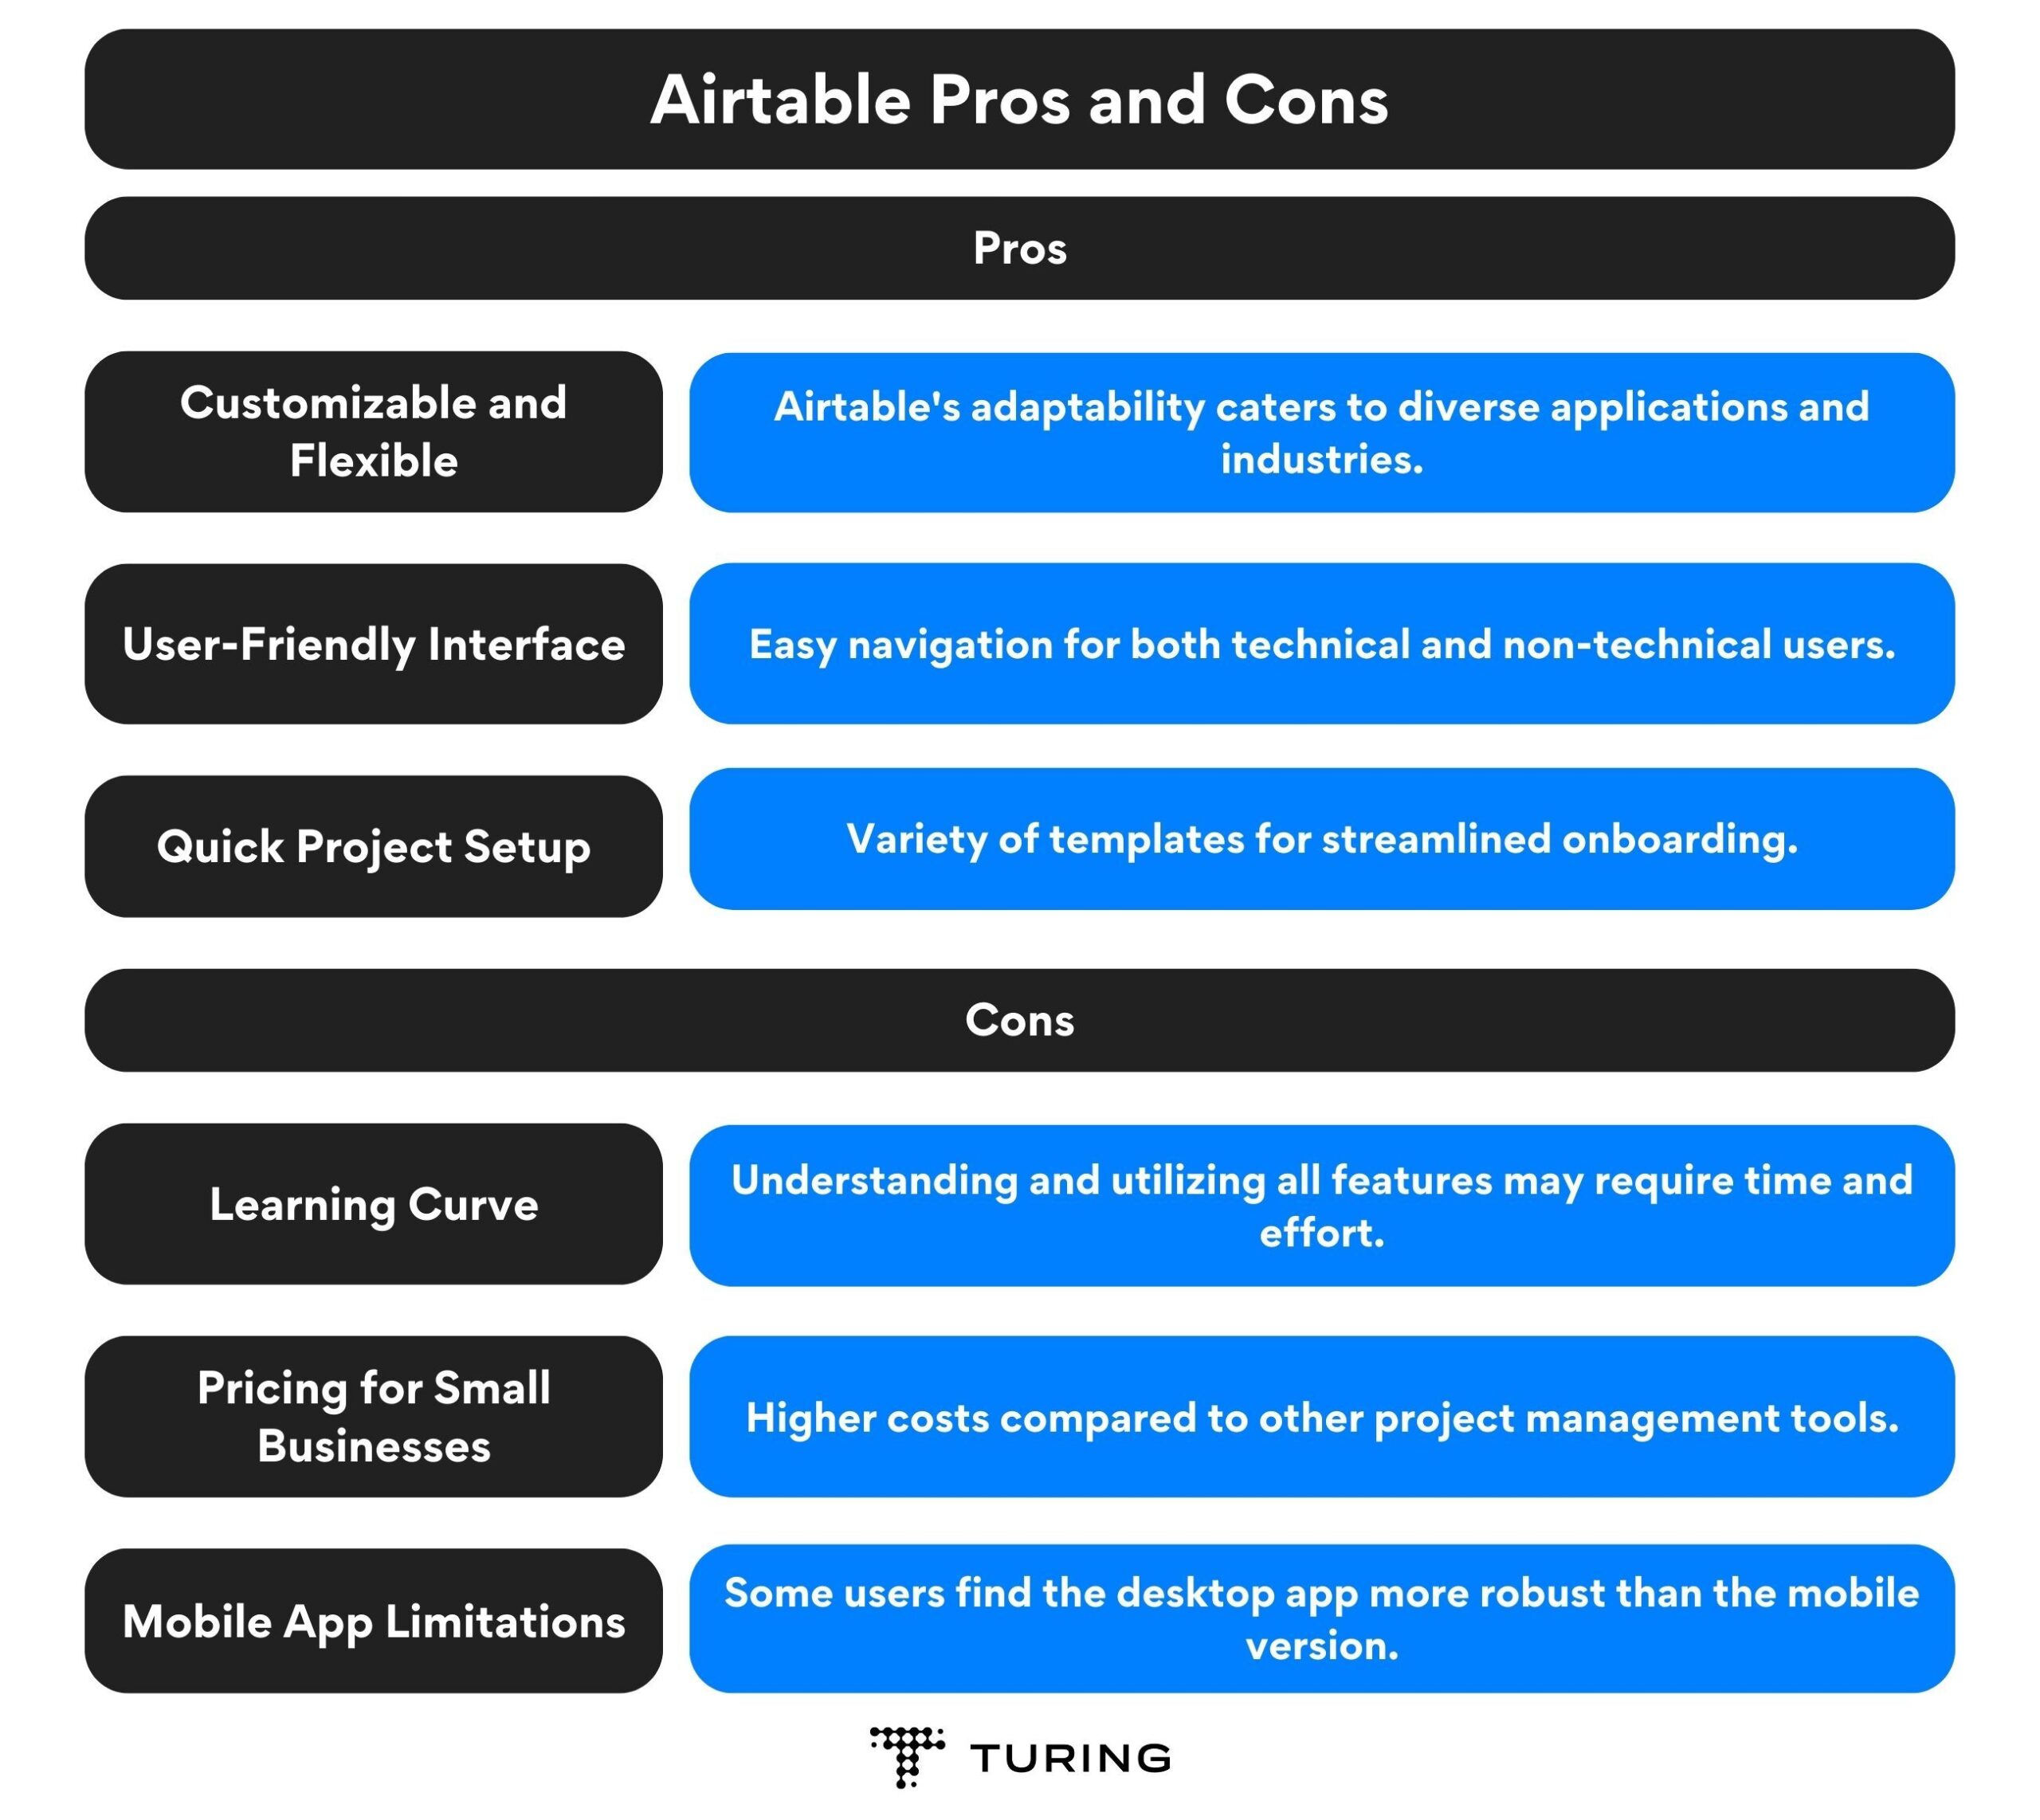 Airtable Pros and Cons